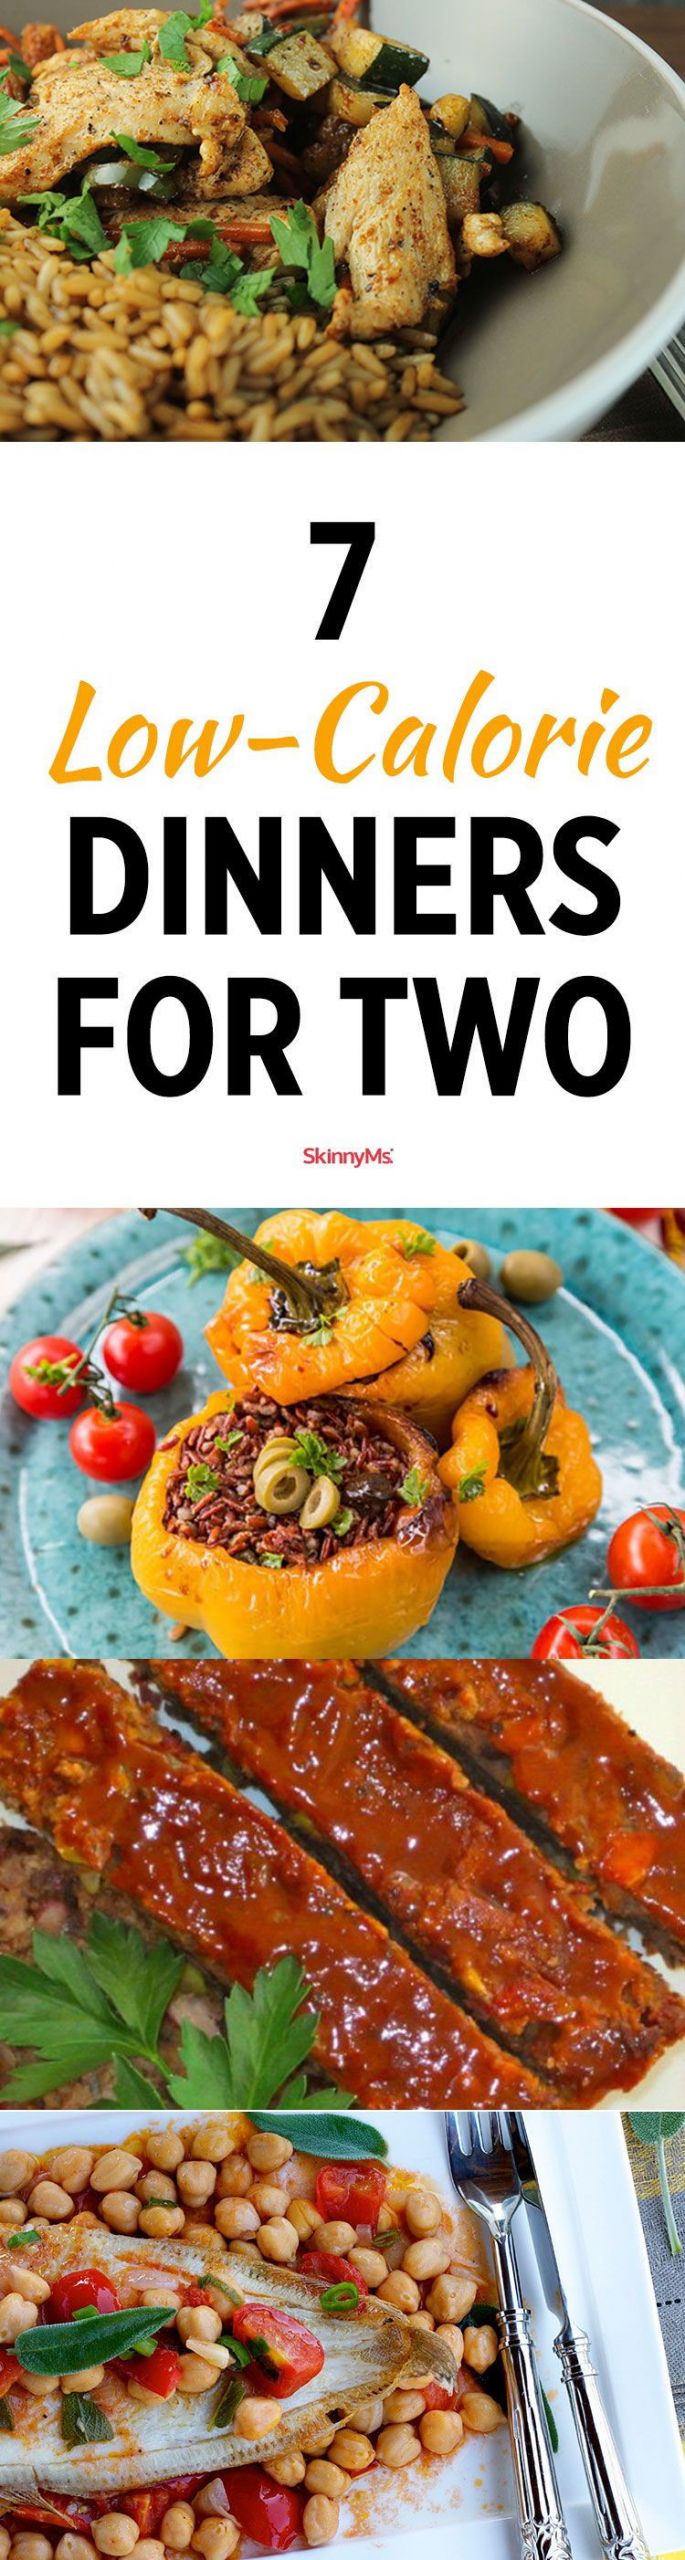 Low Calorie Dinners For Two
 7 Low Calorie Dinners for Two